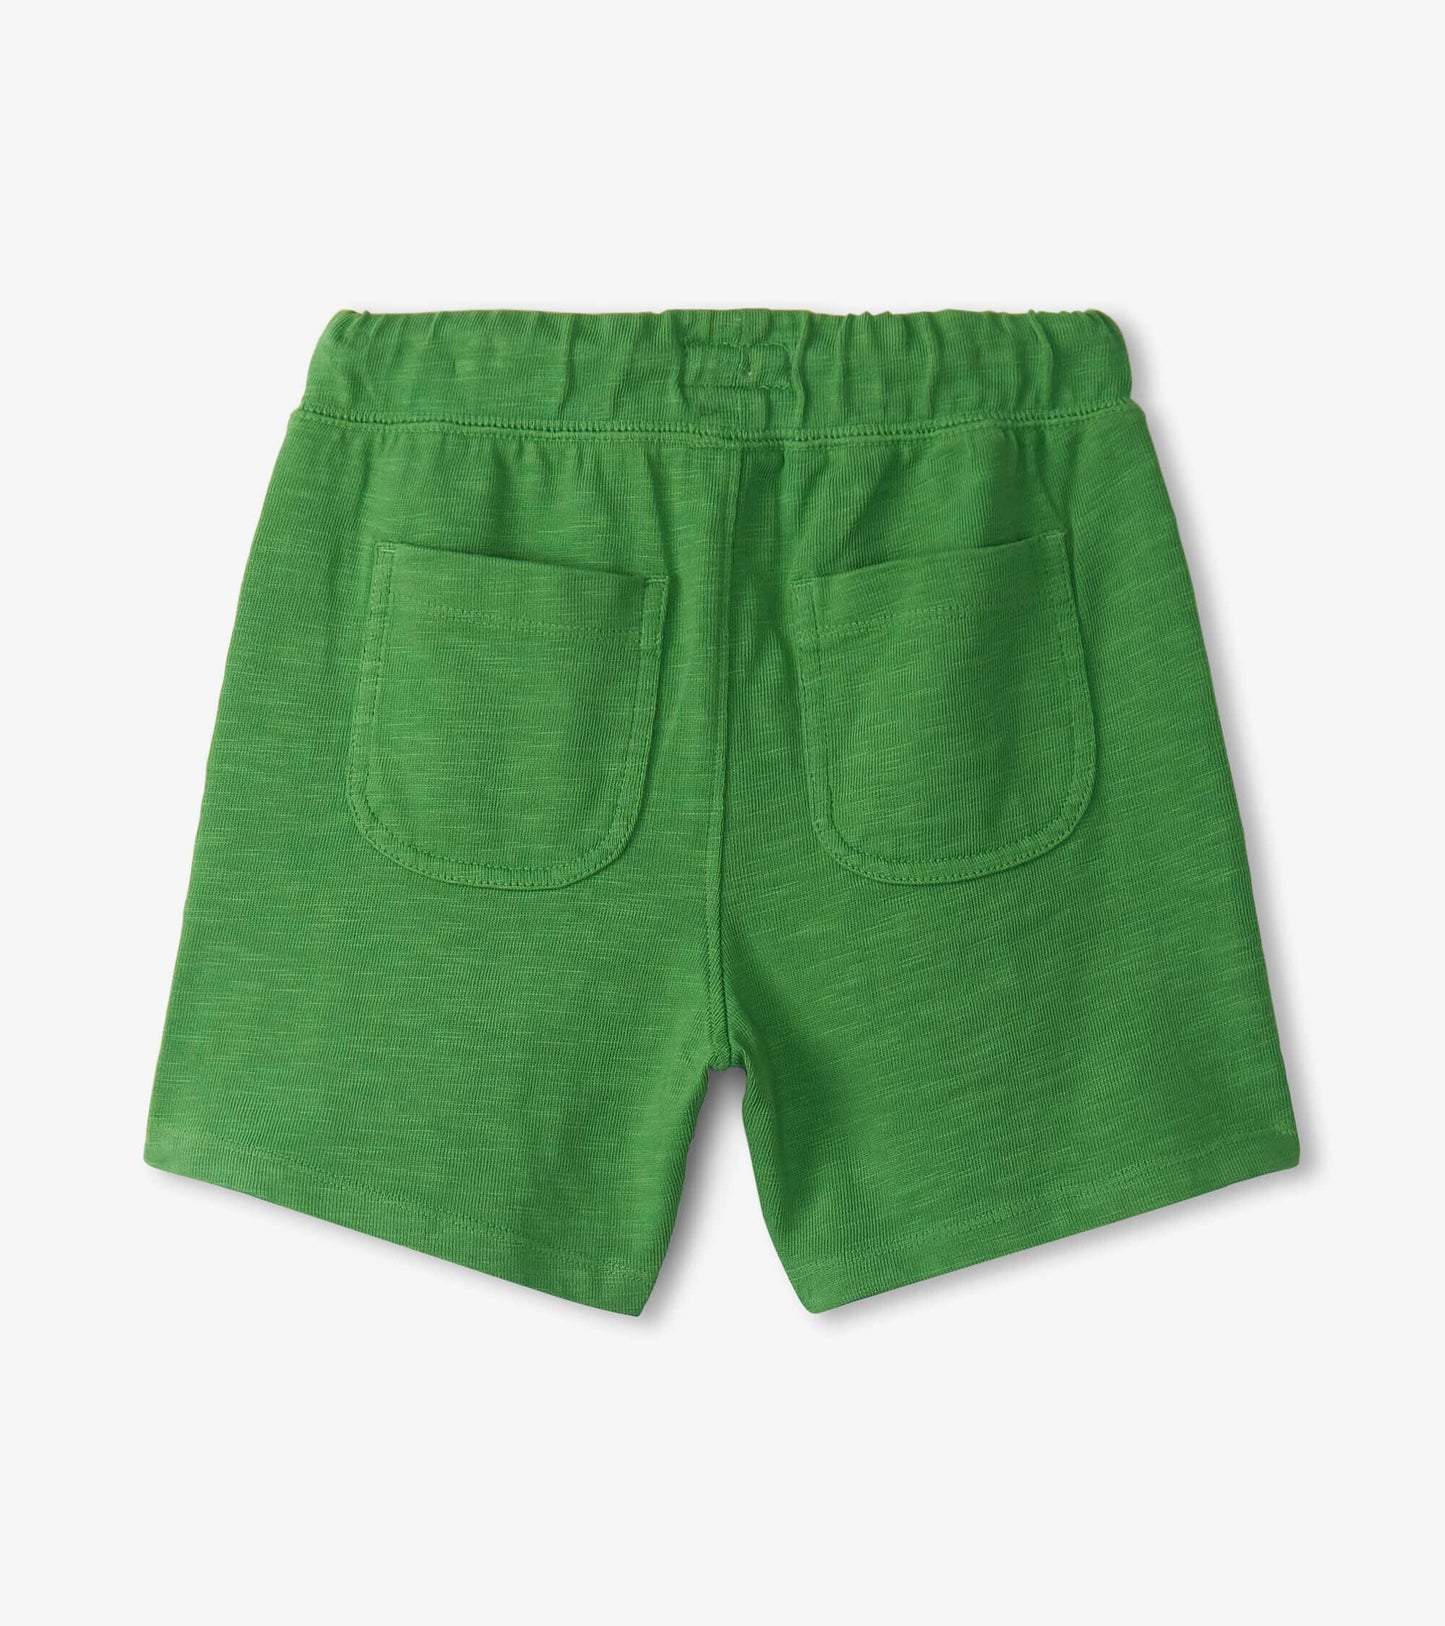 Camp Green Relaxed Shorts 140 BOYS APPAREL 2-8 Hatley Kids 